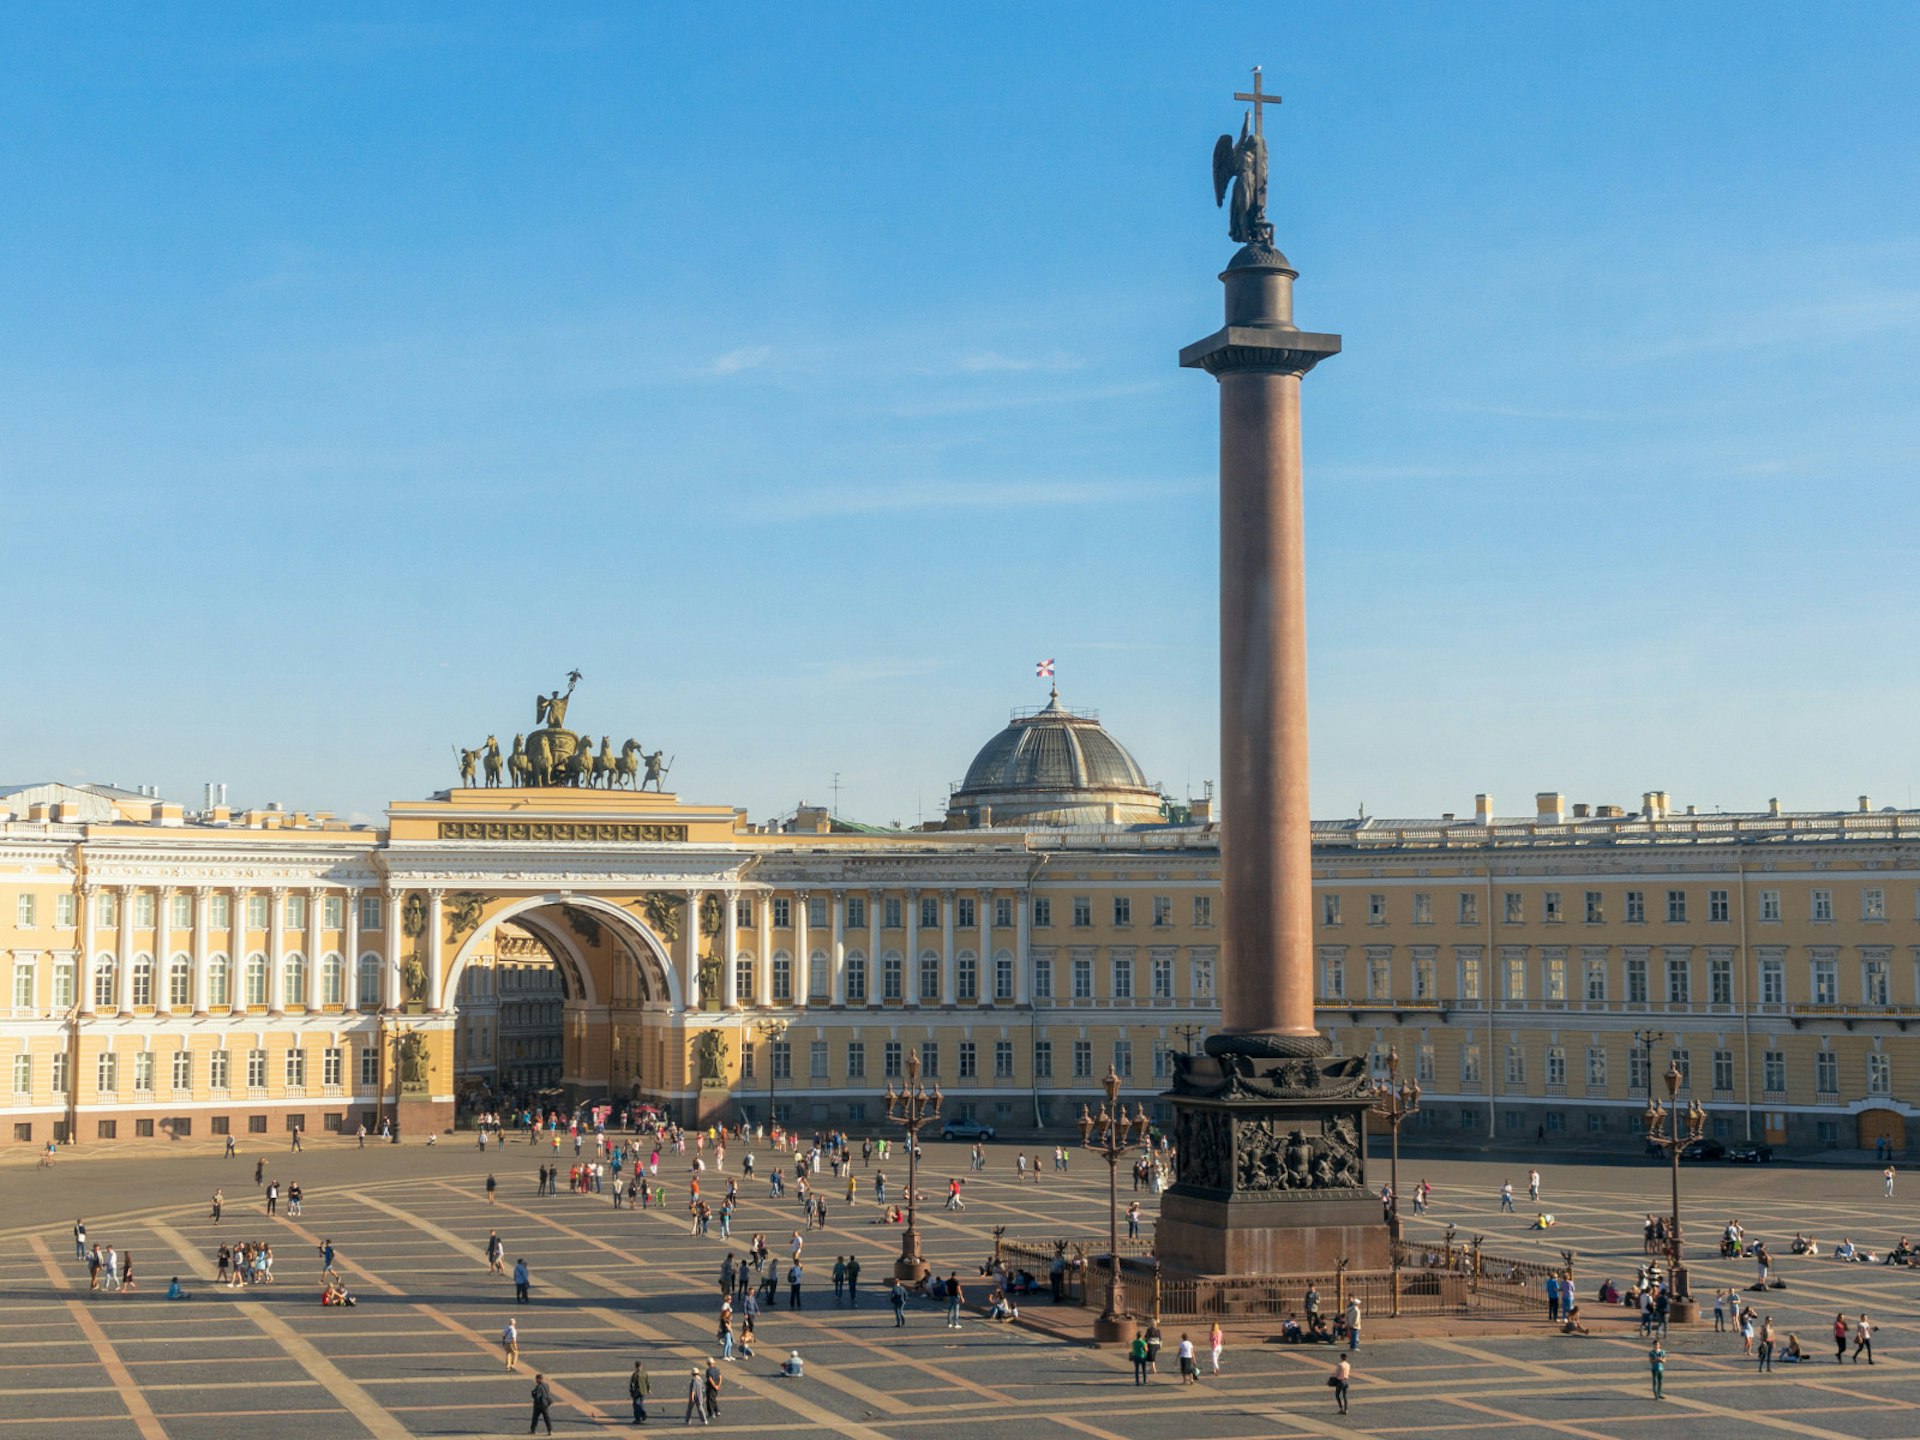 St Petersburg's Palace Square, the starting point for free walking tours © Pelikh Alexey / Shutterstock